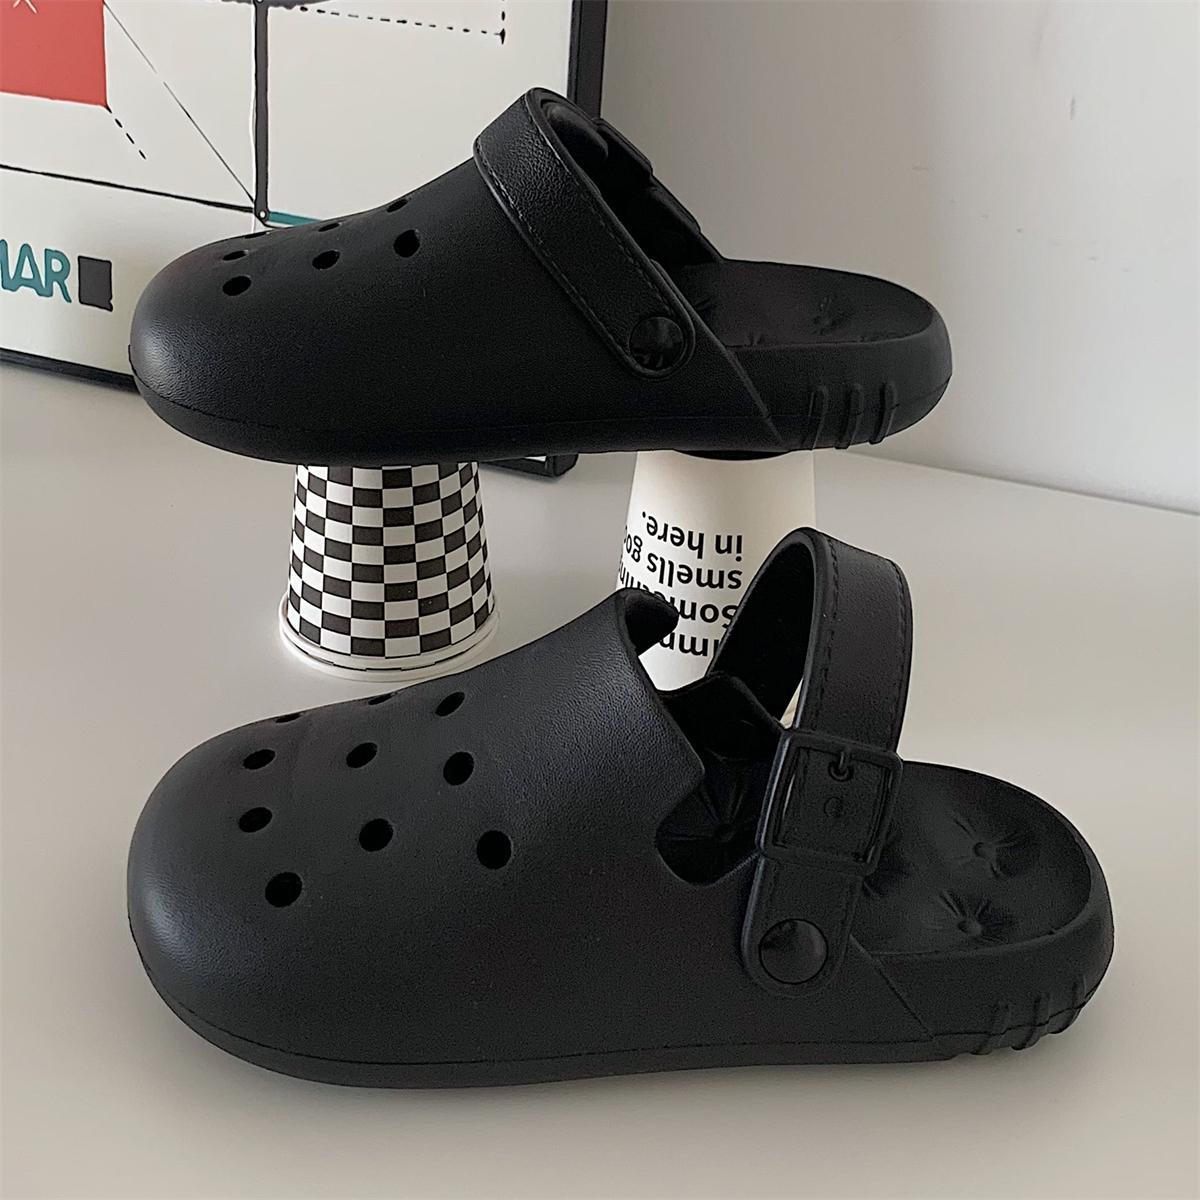 Thin strips cute Baotou eva soft bottom hole shoes female summer students wear seaside non-slip beach sandals and slippers